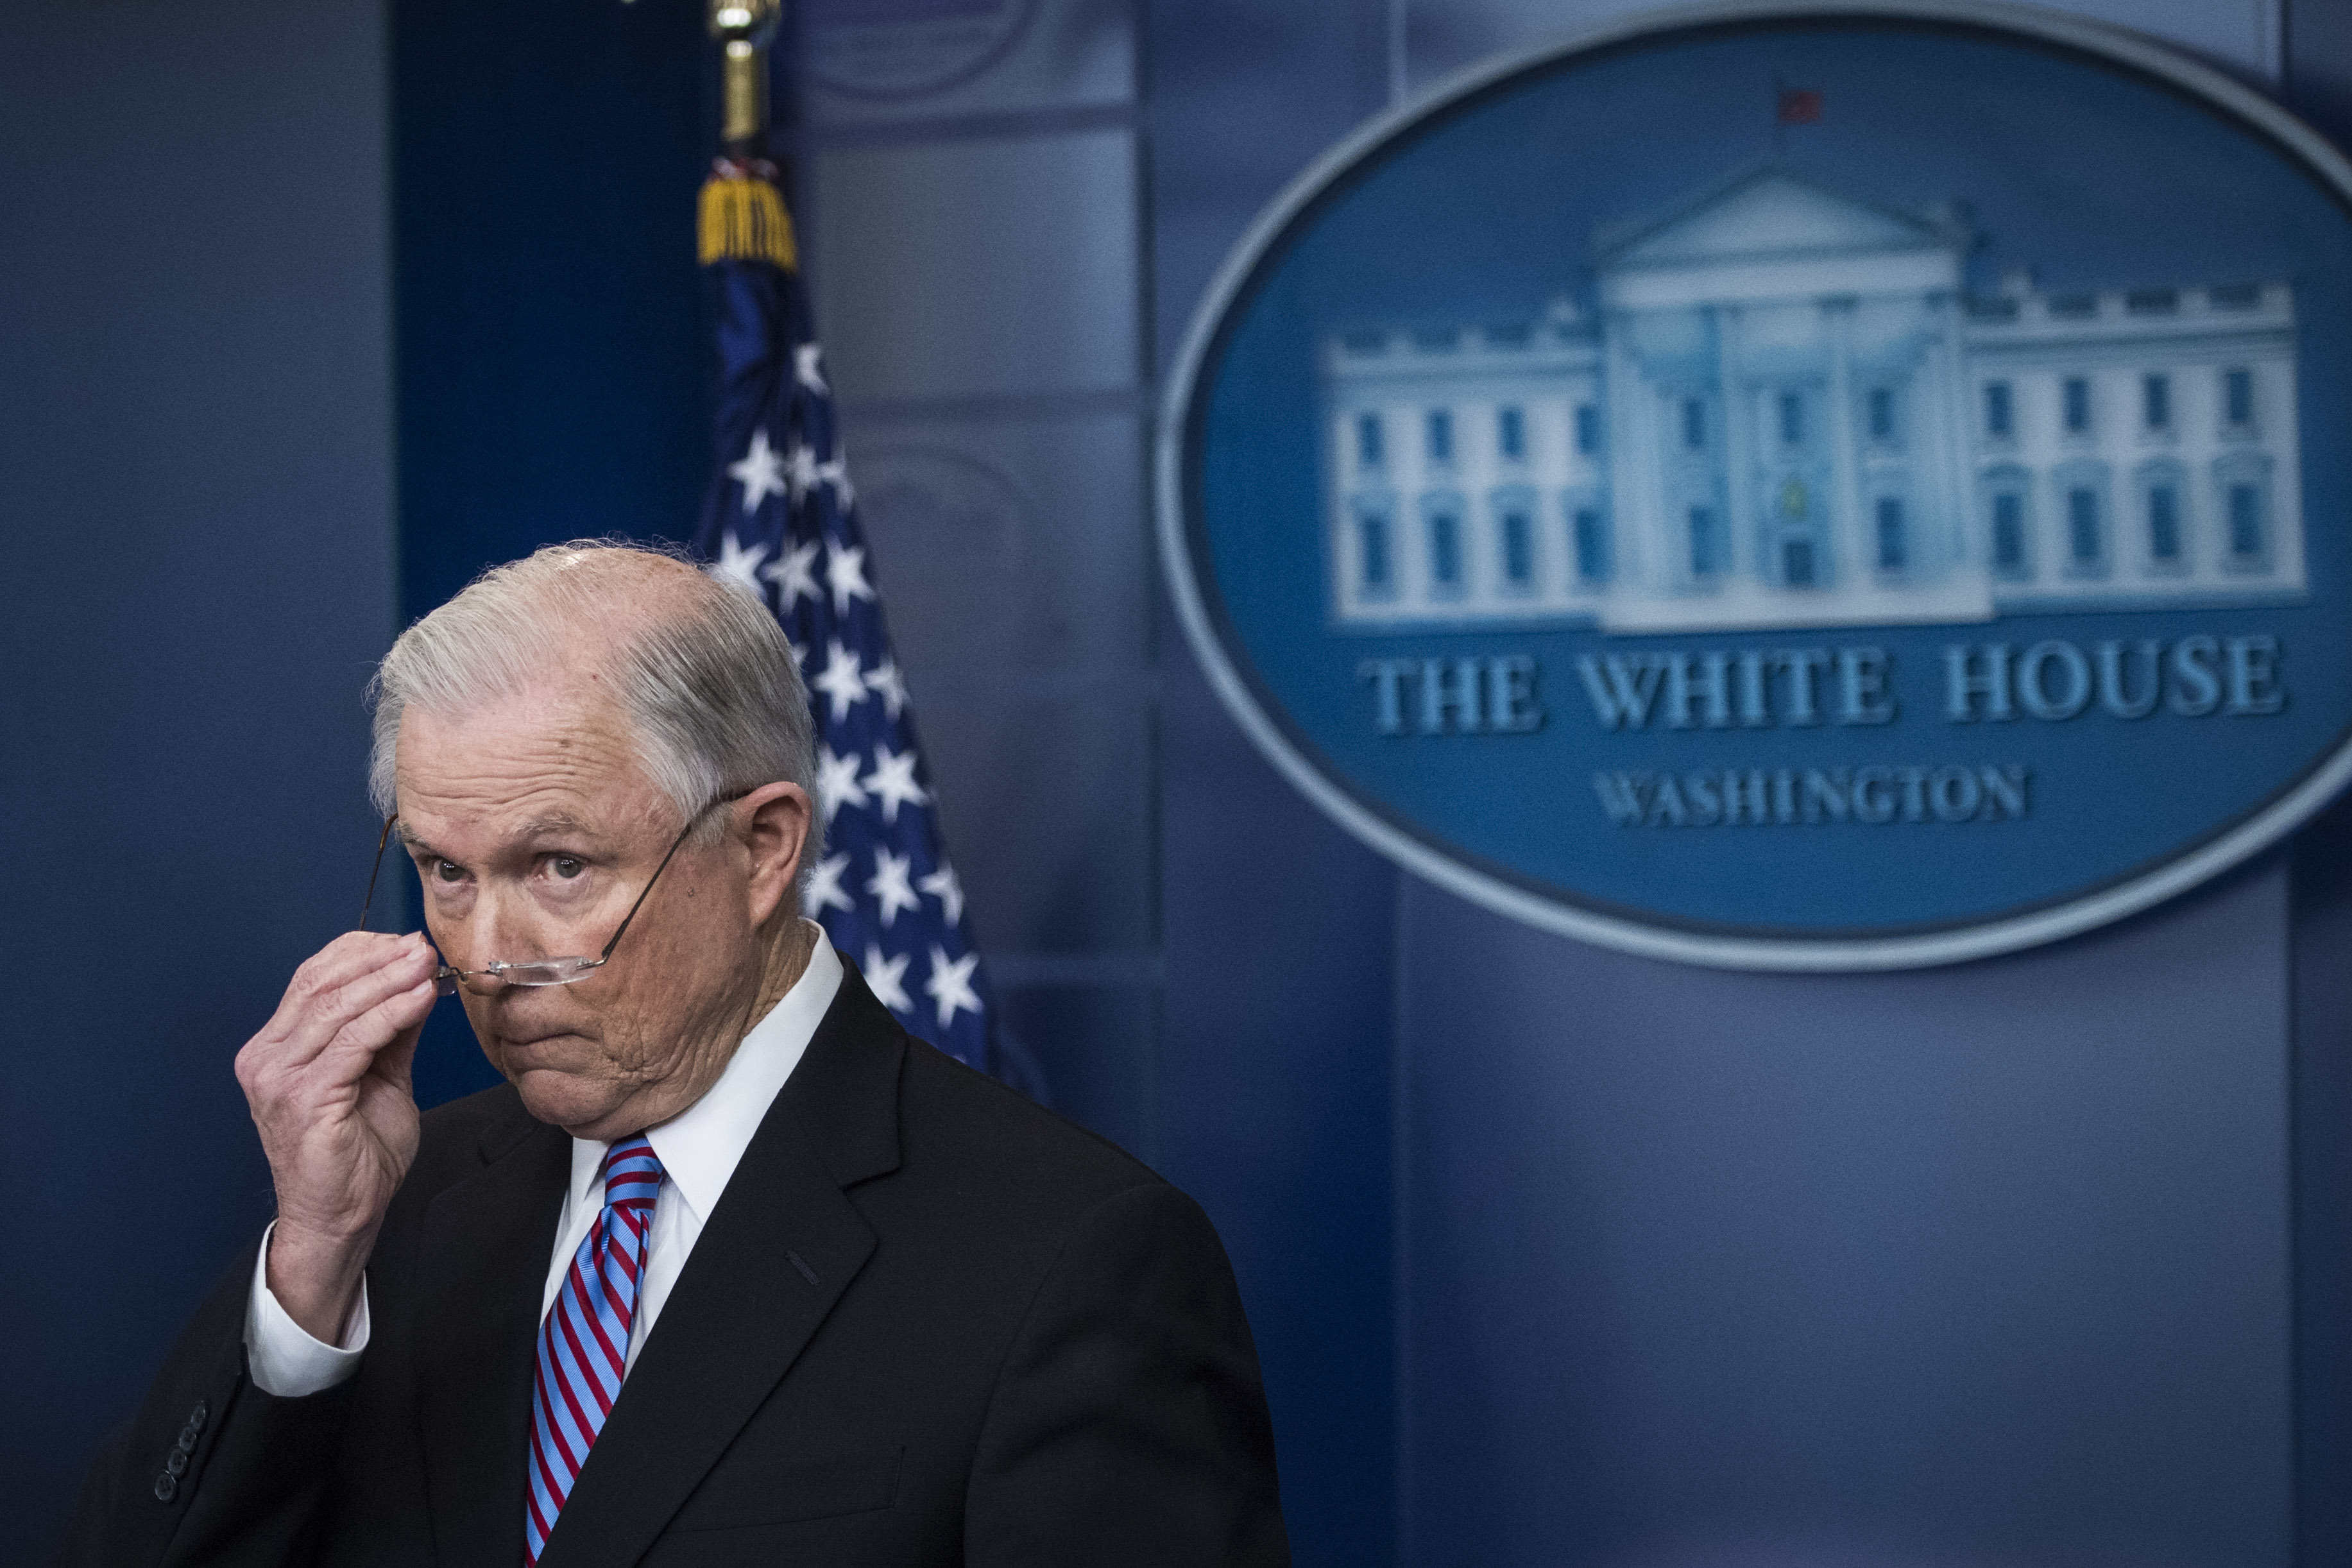 Attorney General Jeff Sessions talks during the daily press briefing at the White House in Washington, D.C. on March 27, 2017. (Jabin Botsford&mdash;The Washington Post/Getty Images)